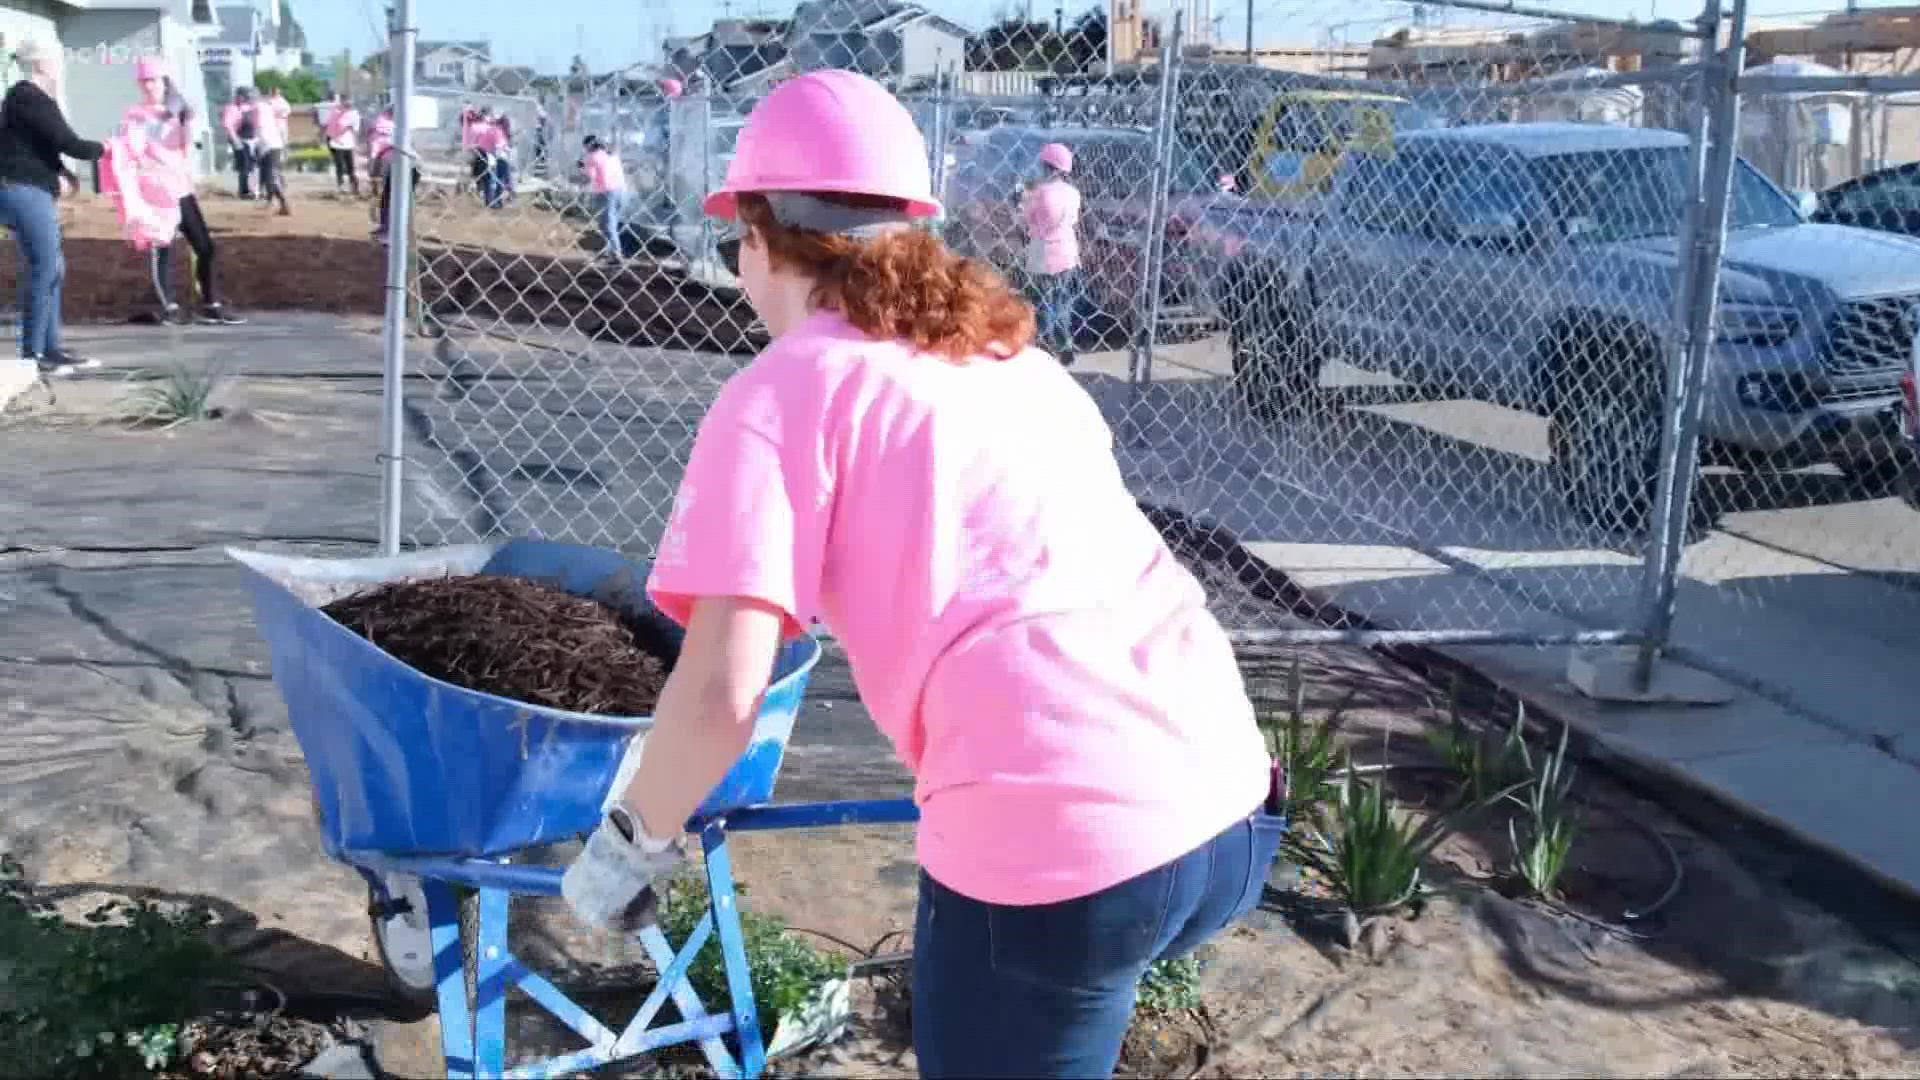 All March, ABC10 has been partnering with Habitat for Humanity of Greater Sacramento in supporting the organization’s Women Build event.